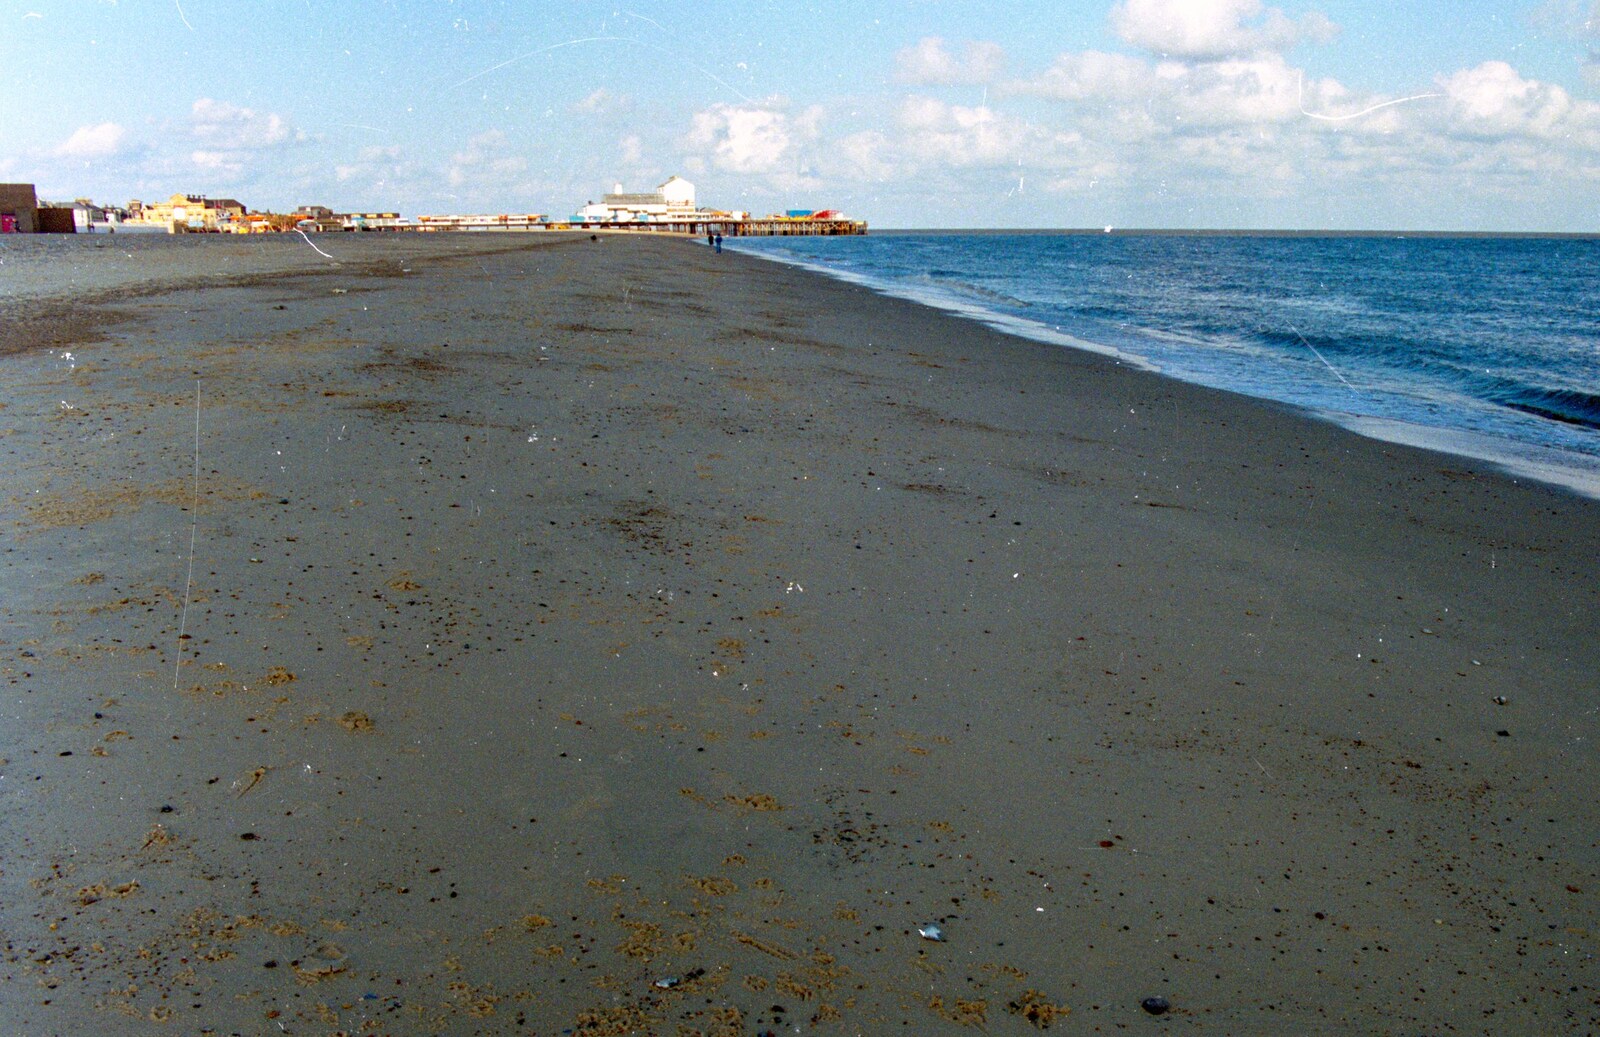 From Waterloo Station to Great Yarmouth, London and Norfolk - 20th September 1987: Yarmouth beach